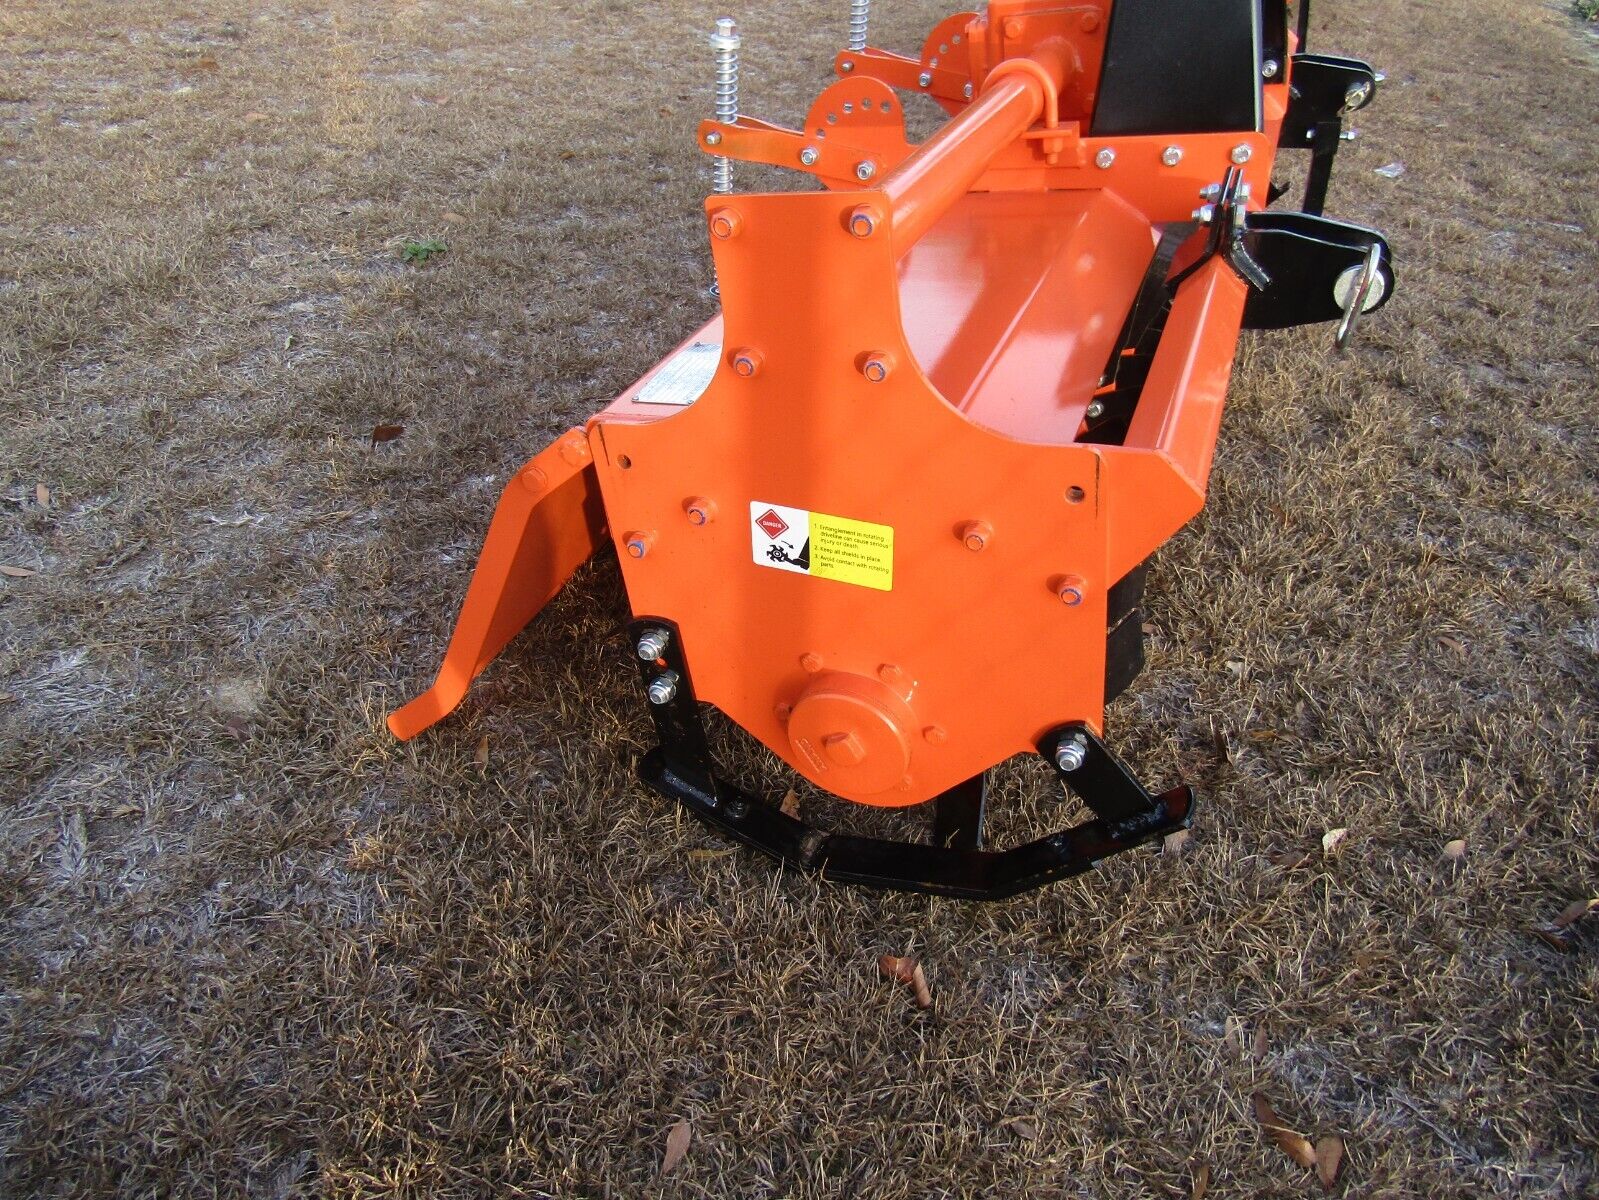 55" Rotary Tiller, HD Gear drive (no chain), slip clutch pto, all welded A-Frame